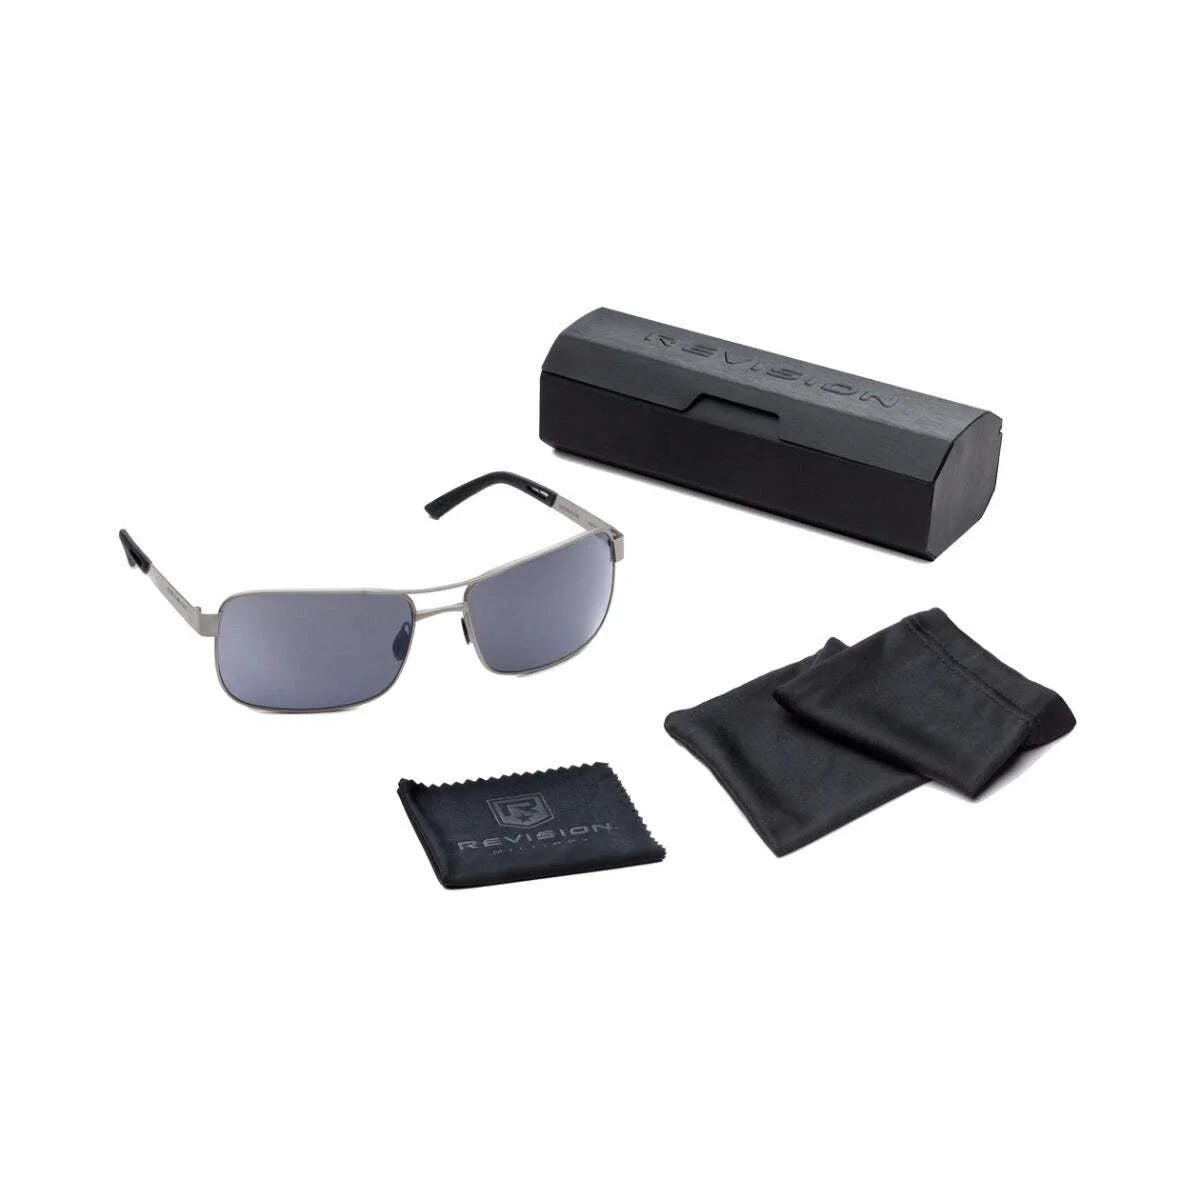 Revision Deltawing Sunglasses